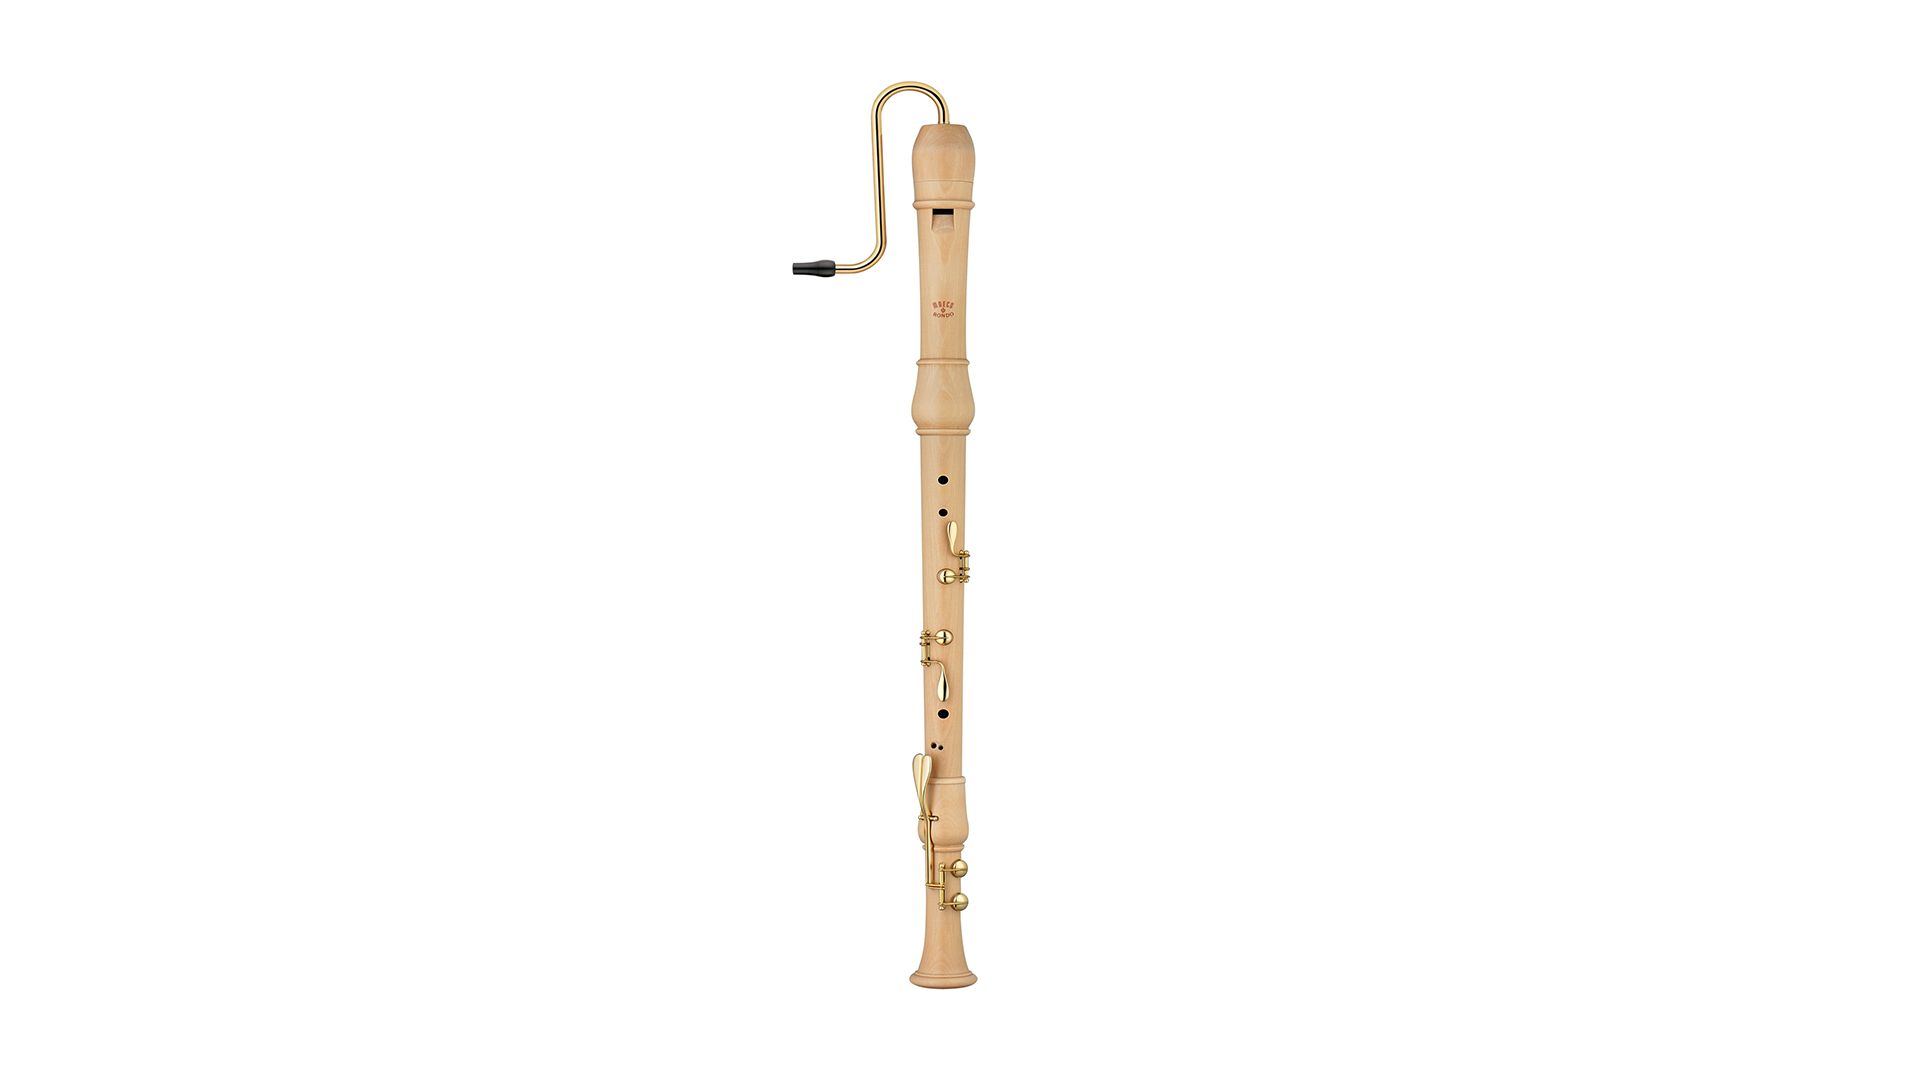 Moeck, Flauto Rondo bass in f', baroque double hole, maple,